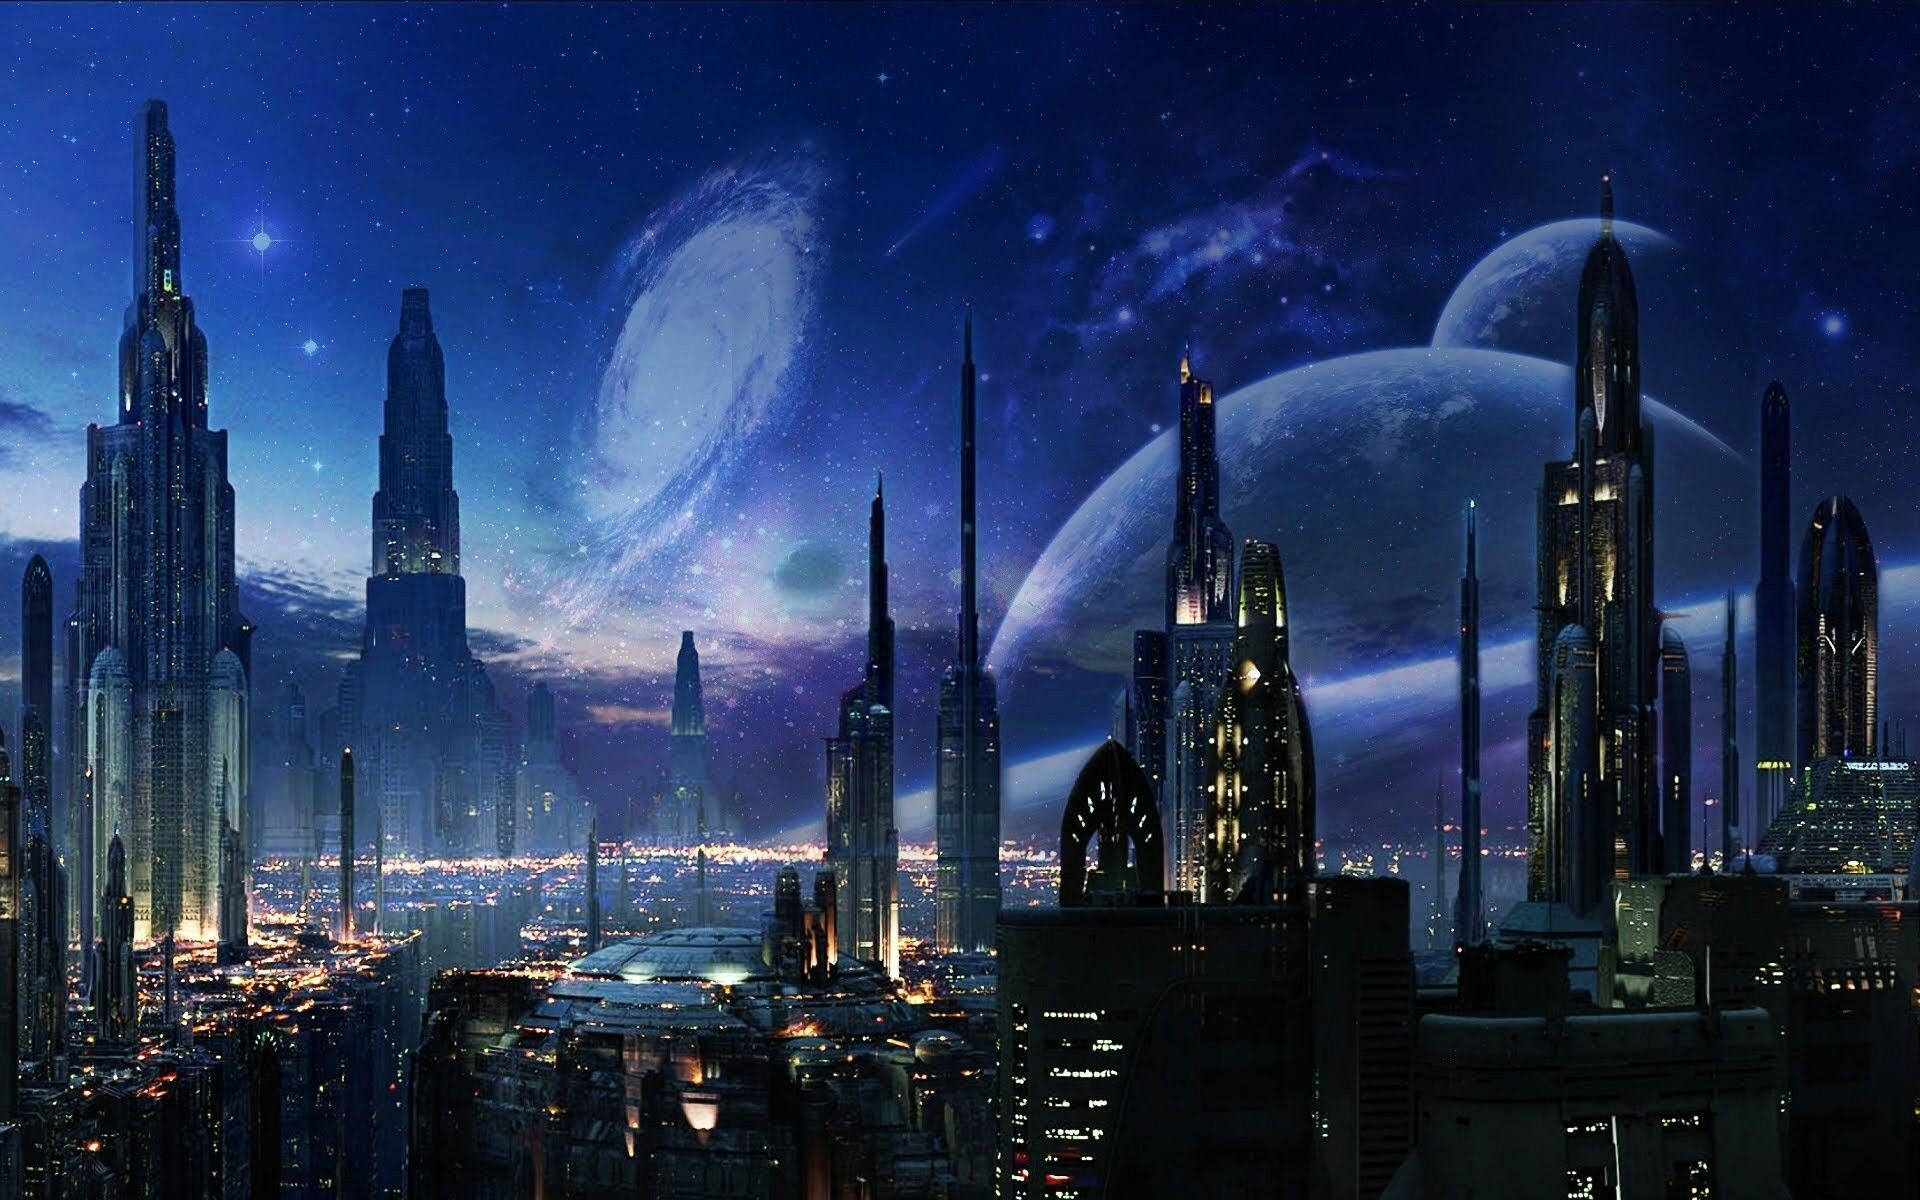 Future Space City Wallpaper: HD, 4K, 5K for PC and Mobile. Download free image for iPhone, Android